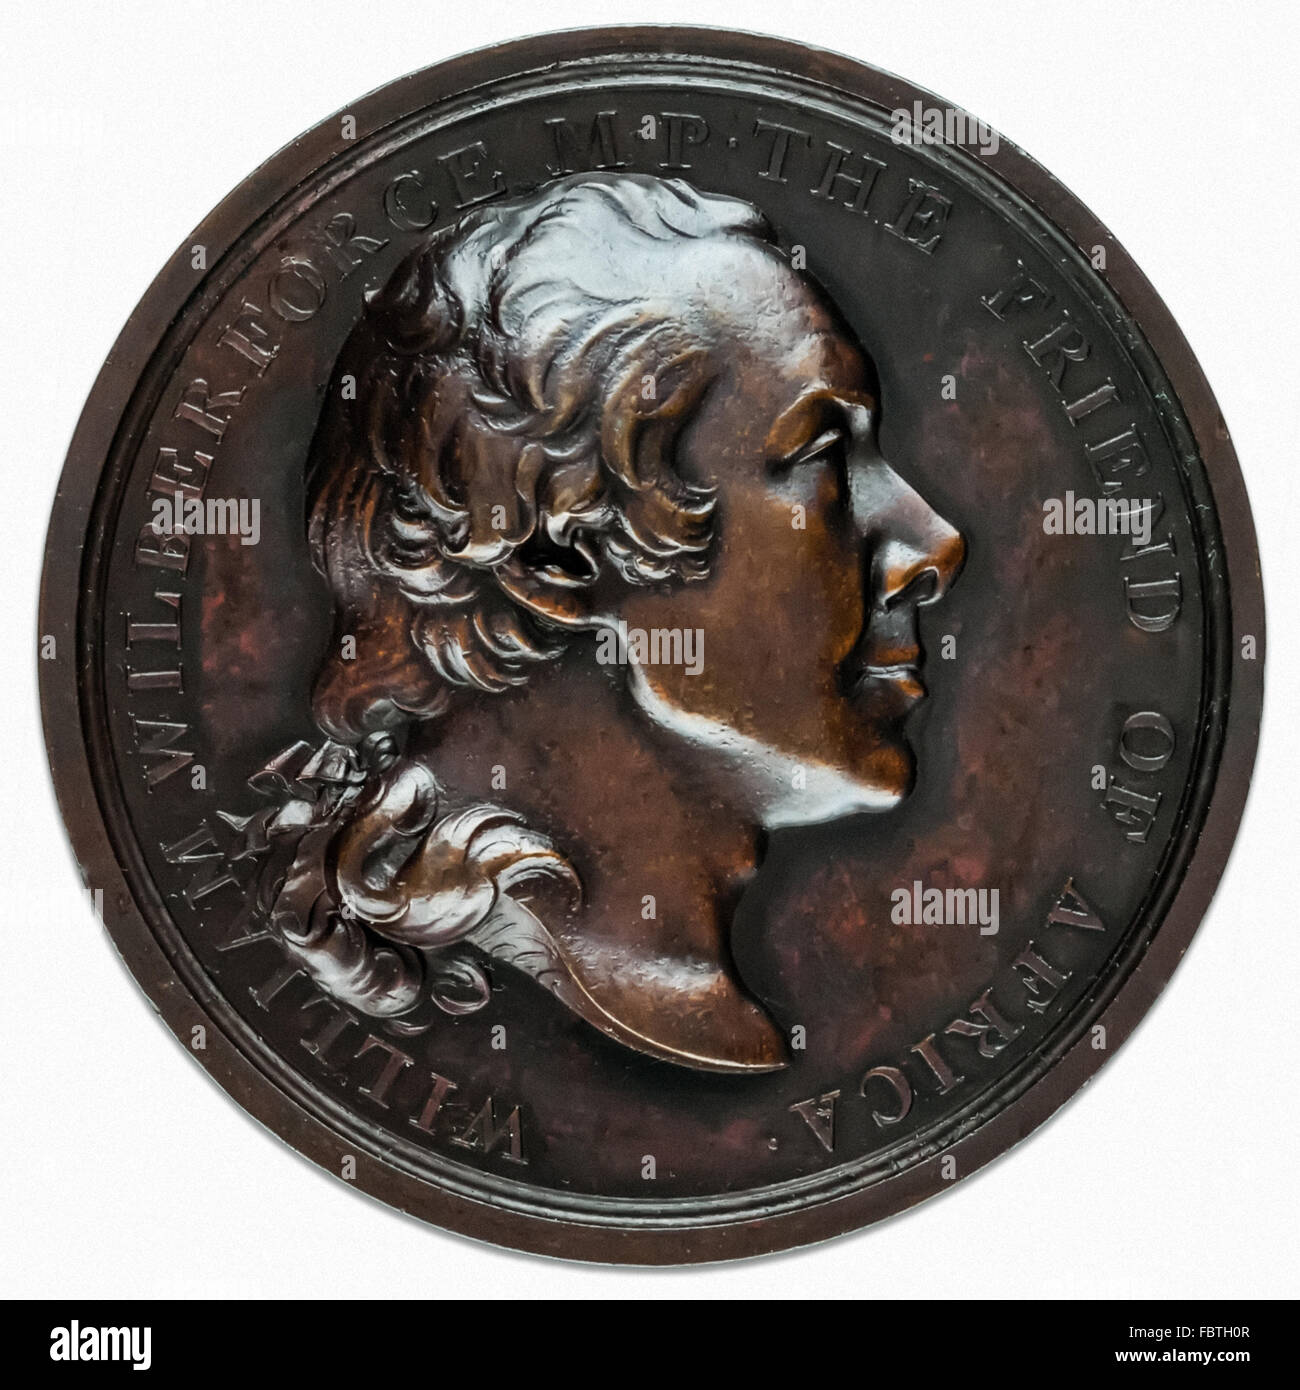 'William Wilberforce M.P. The Friend of Africa' bronze medal cast in 1807 by D. B. Spooner & Co., Birmingham, United Kingdom. Stock Photo